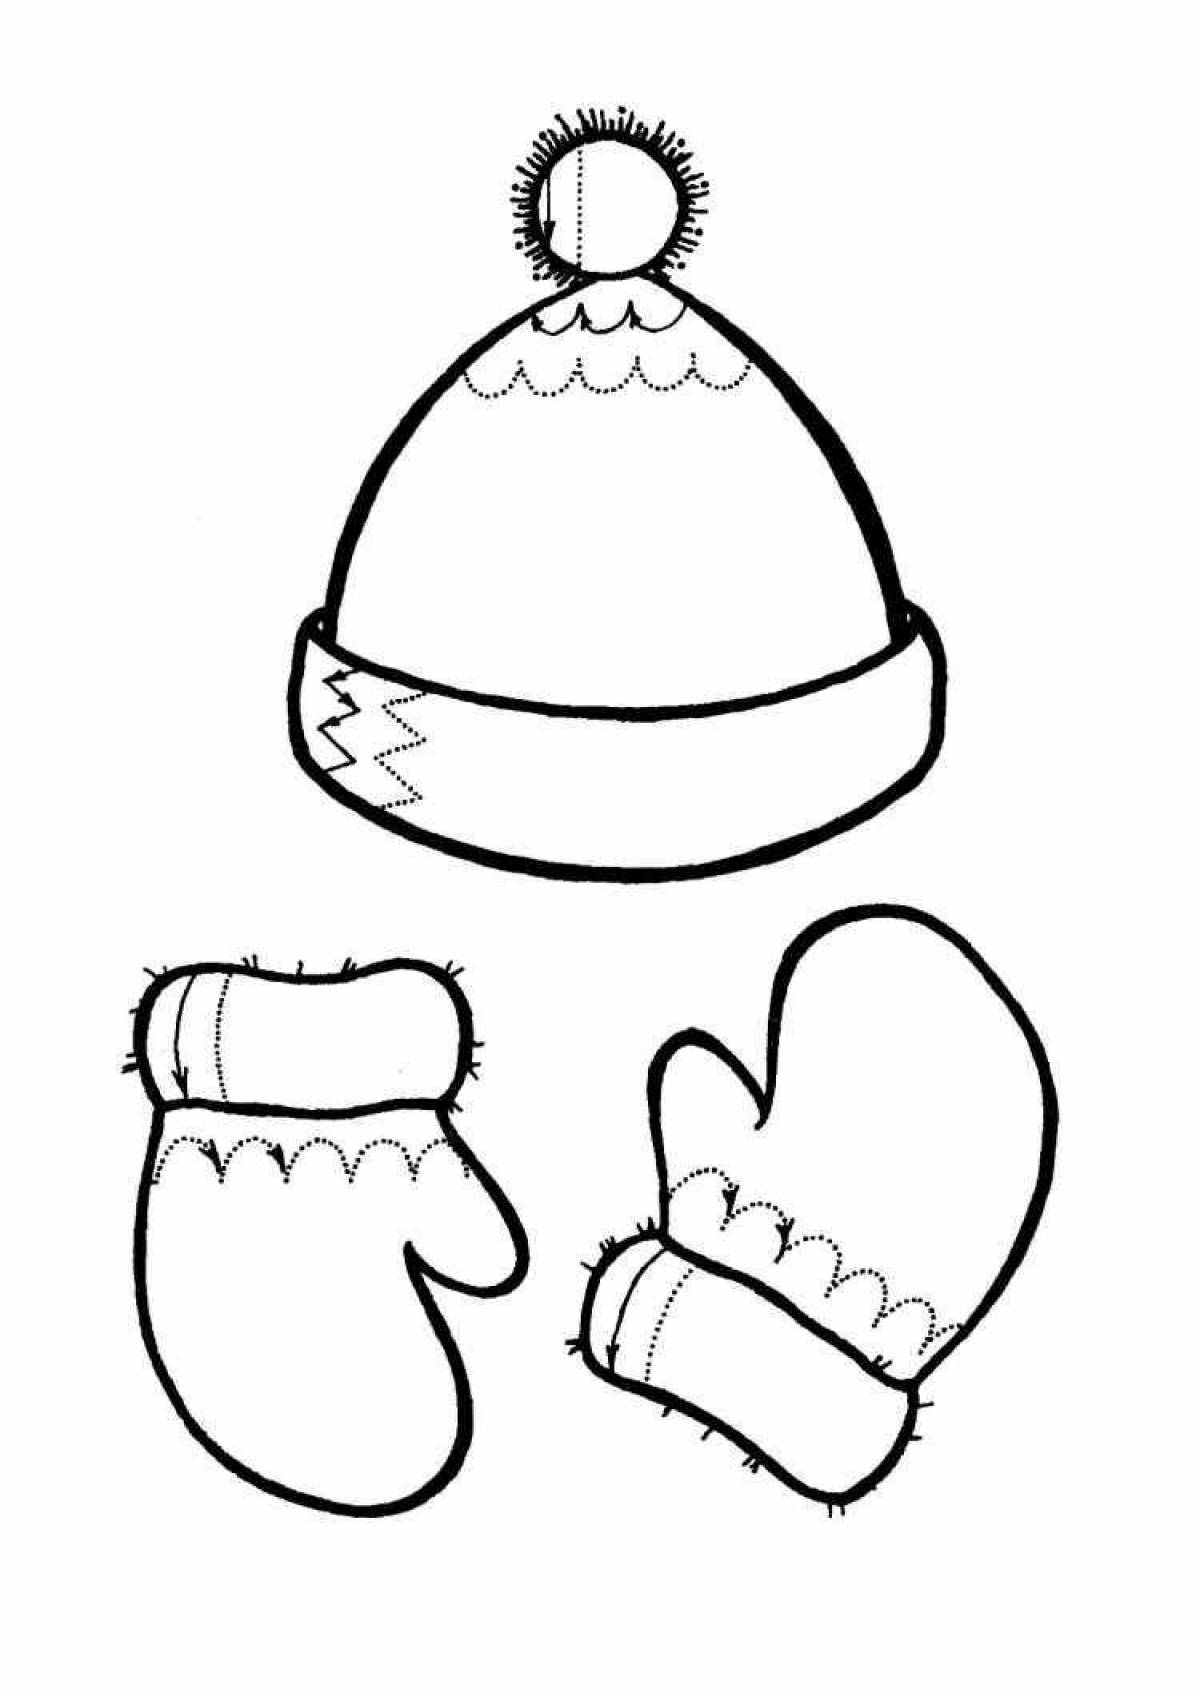 Coloring book warm winter hat